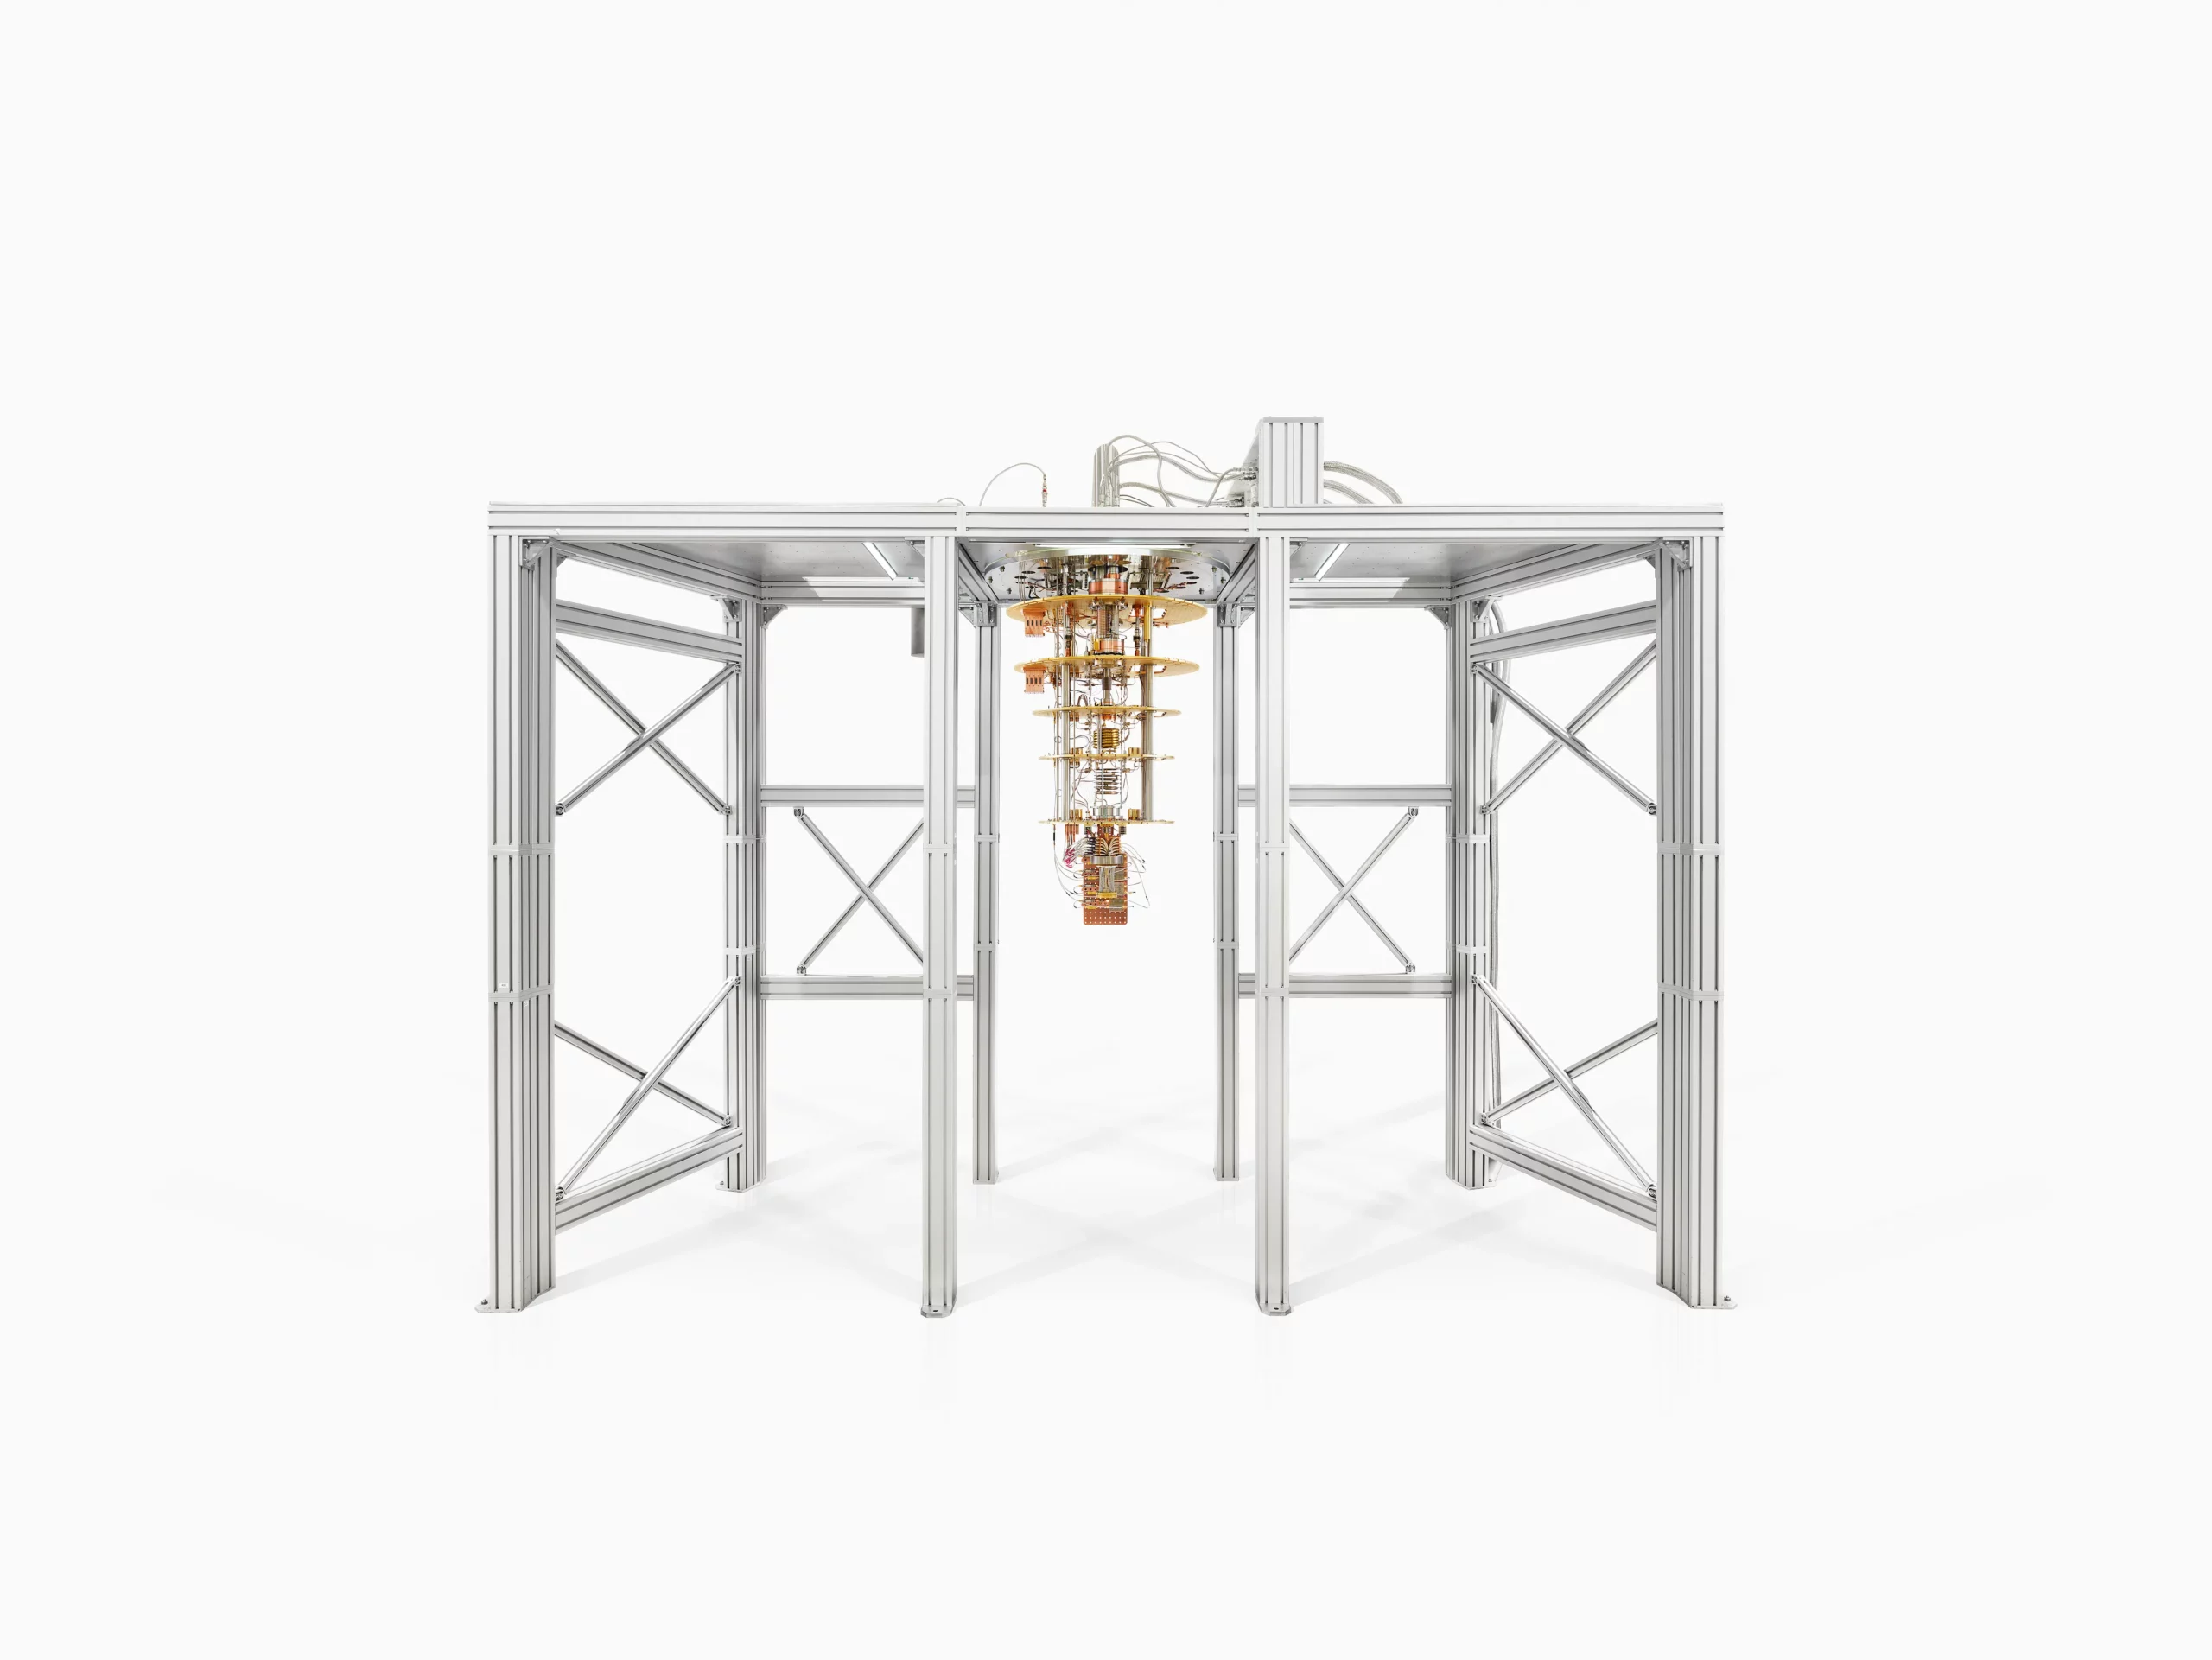 Rigetti and Oxford Instruments Announce Successful Completion of Innovate UK Project to Launch One of The First UK-Based Quantum Computers